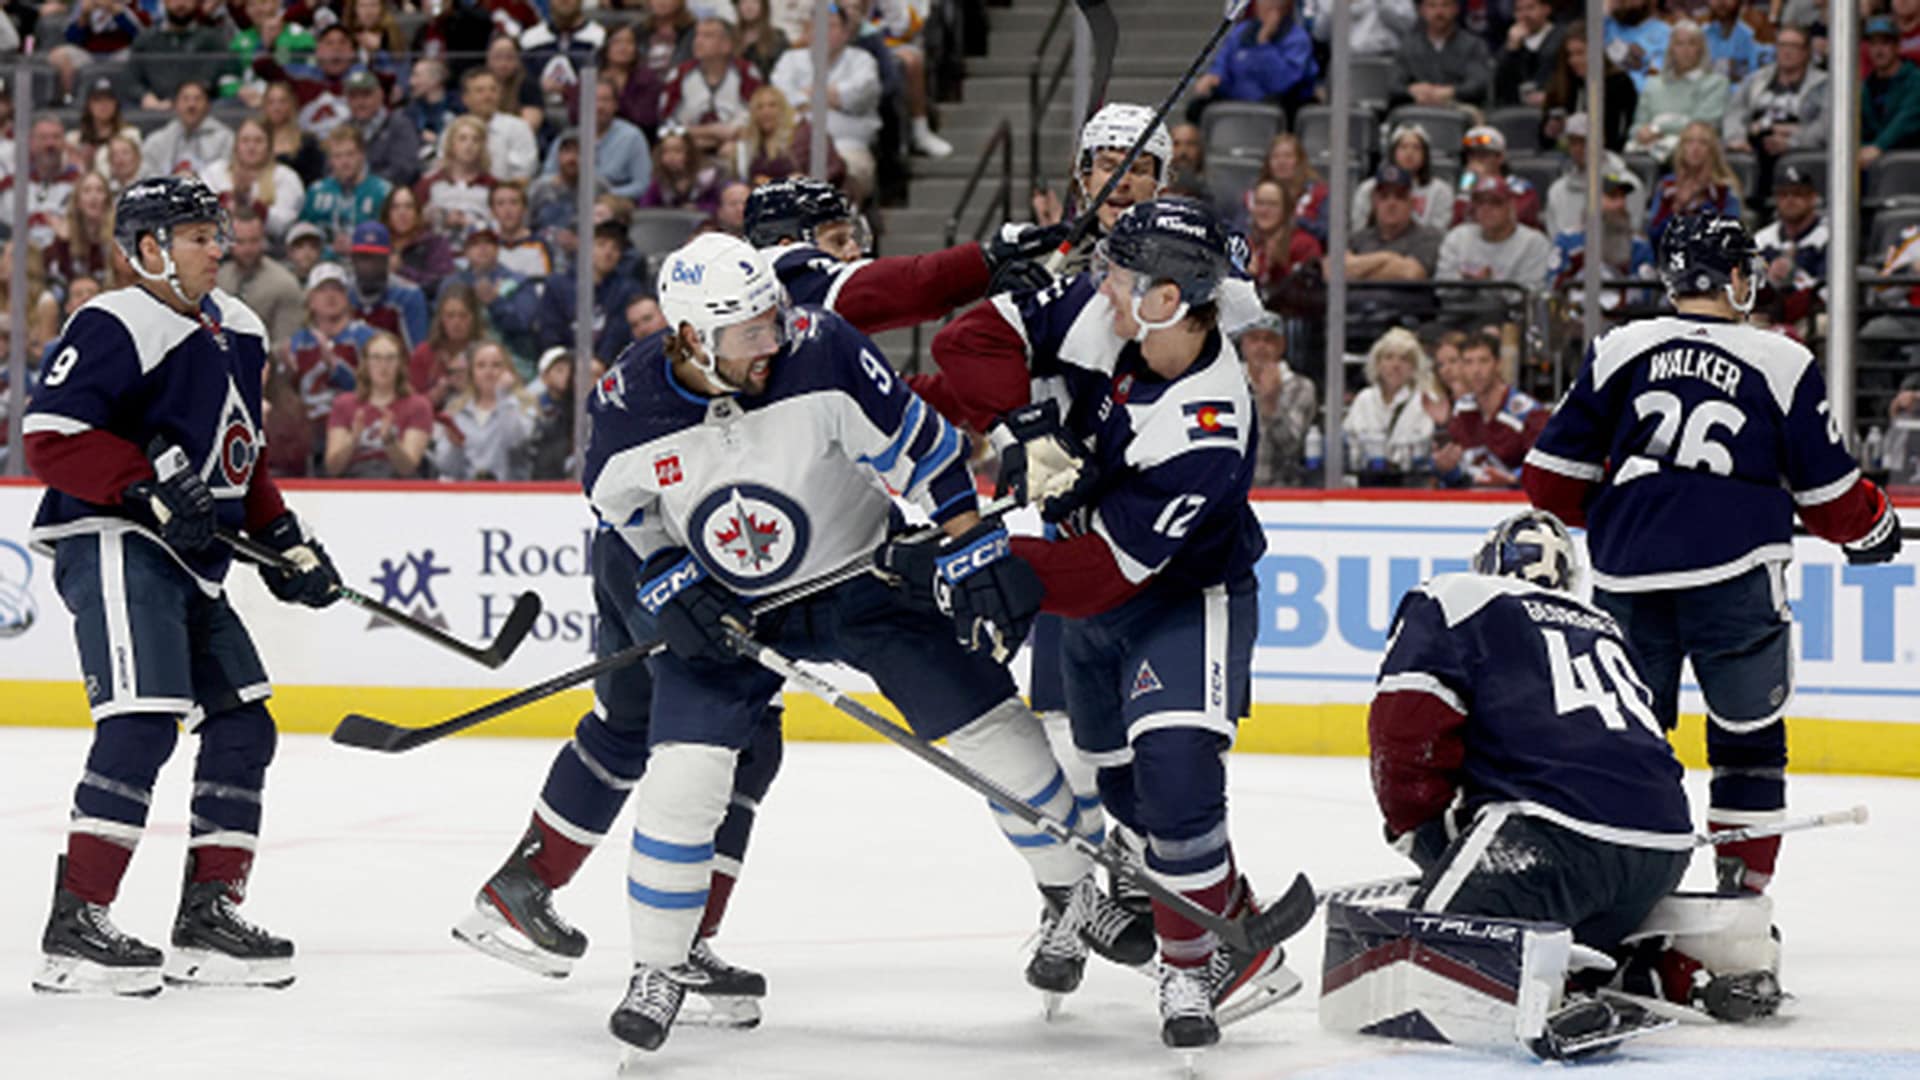 Who has the edge in the first round between the Jets and the Avalanche?